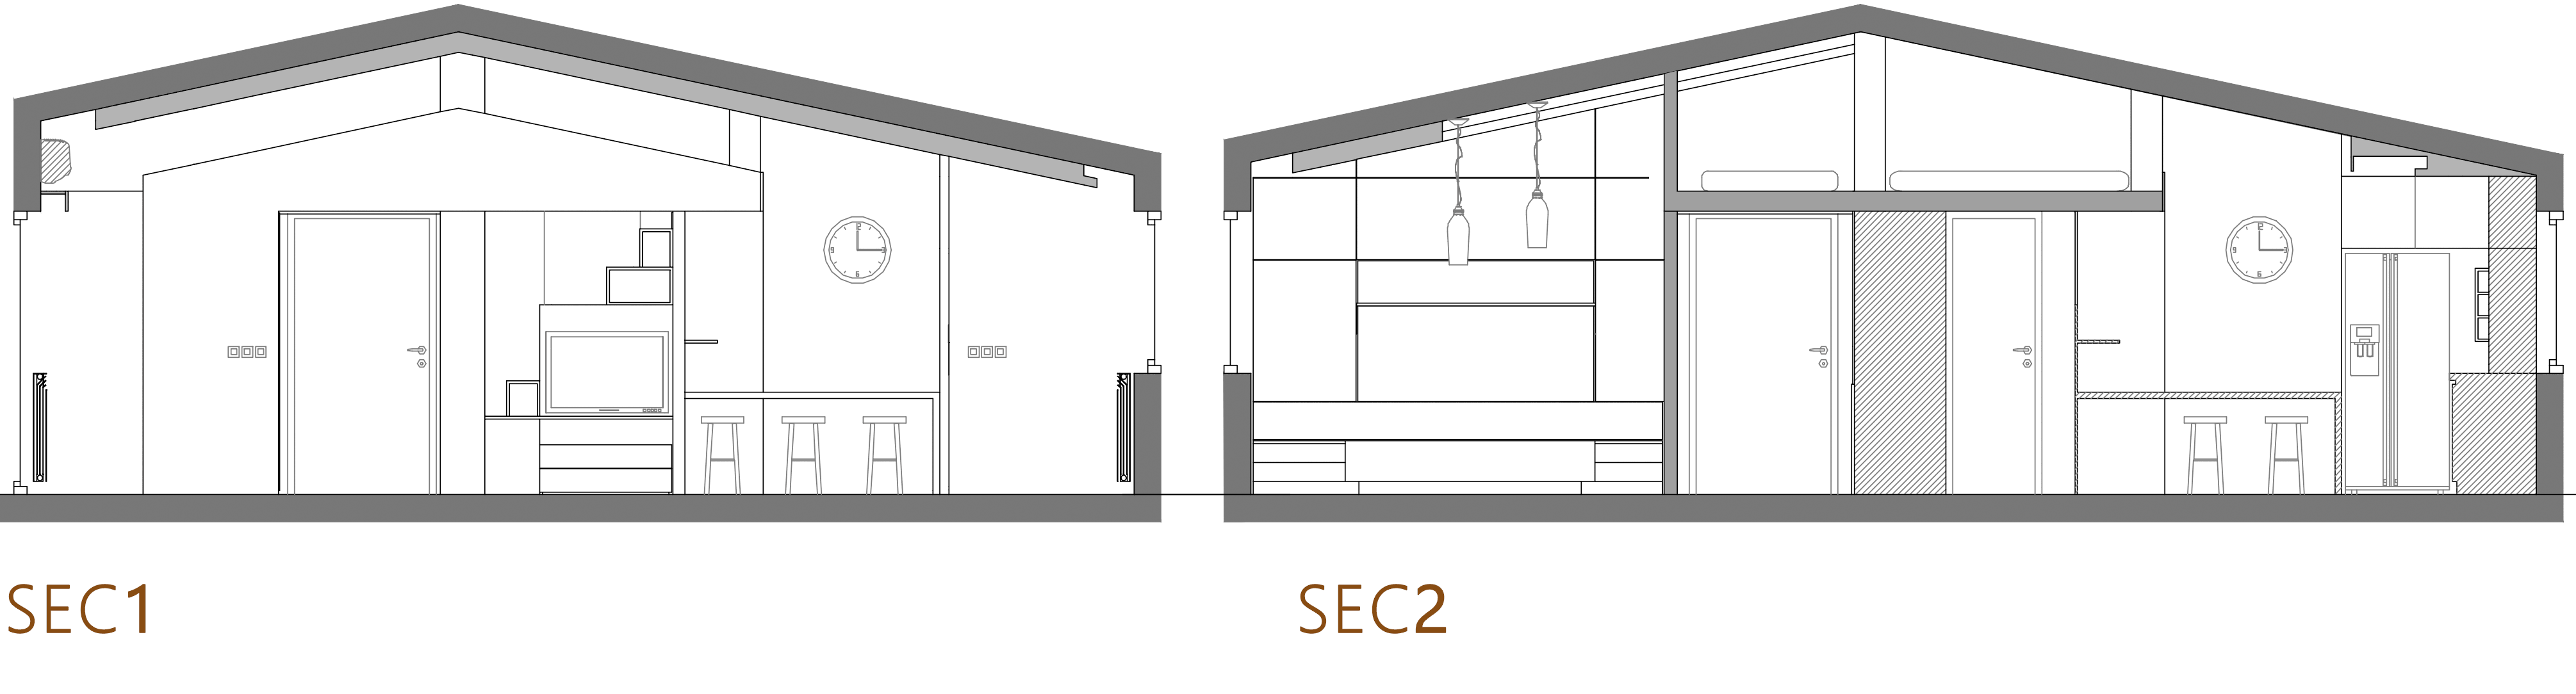 section 1 & 2